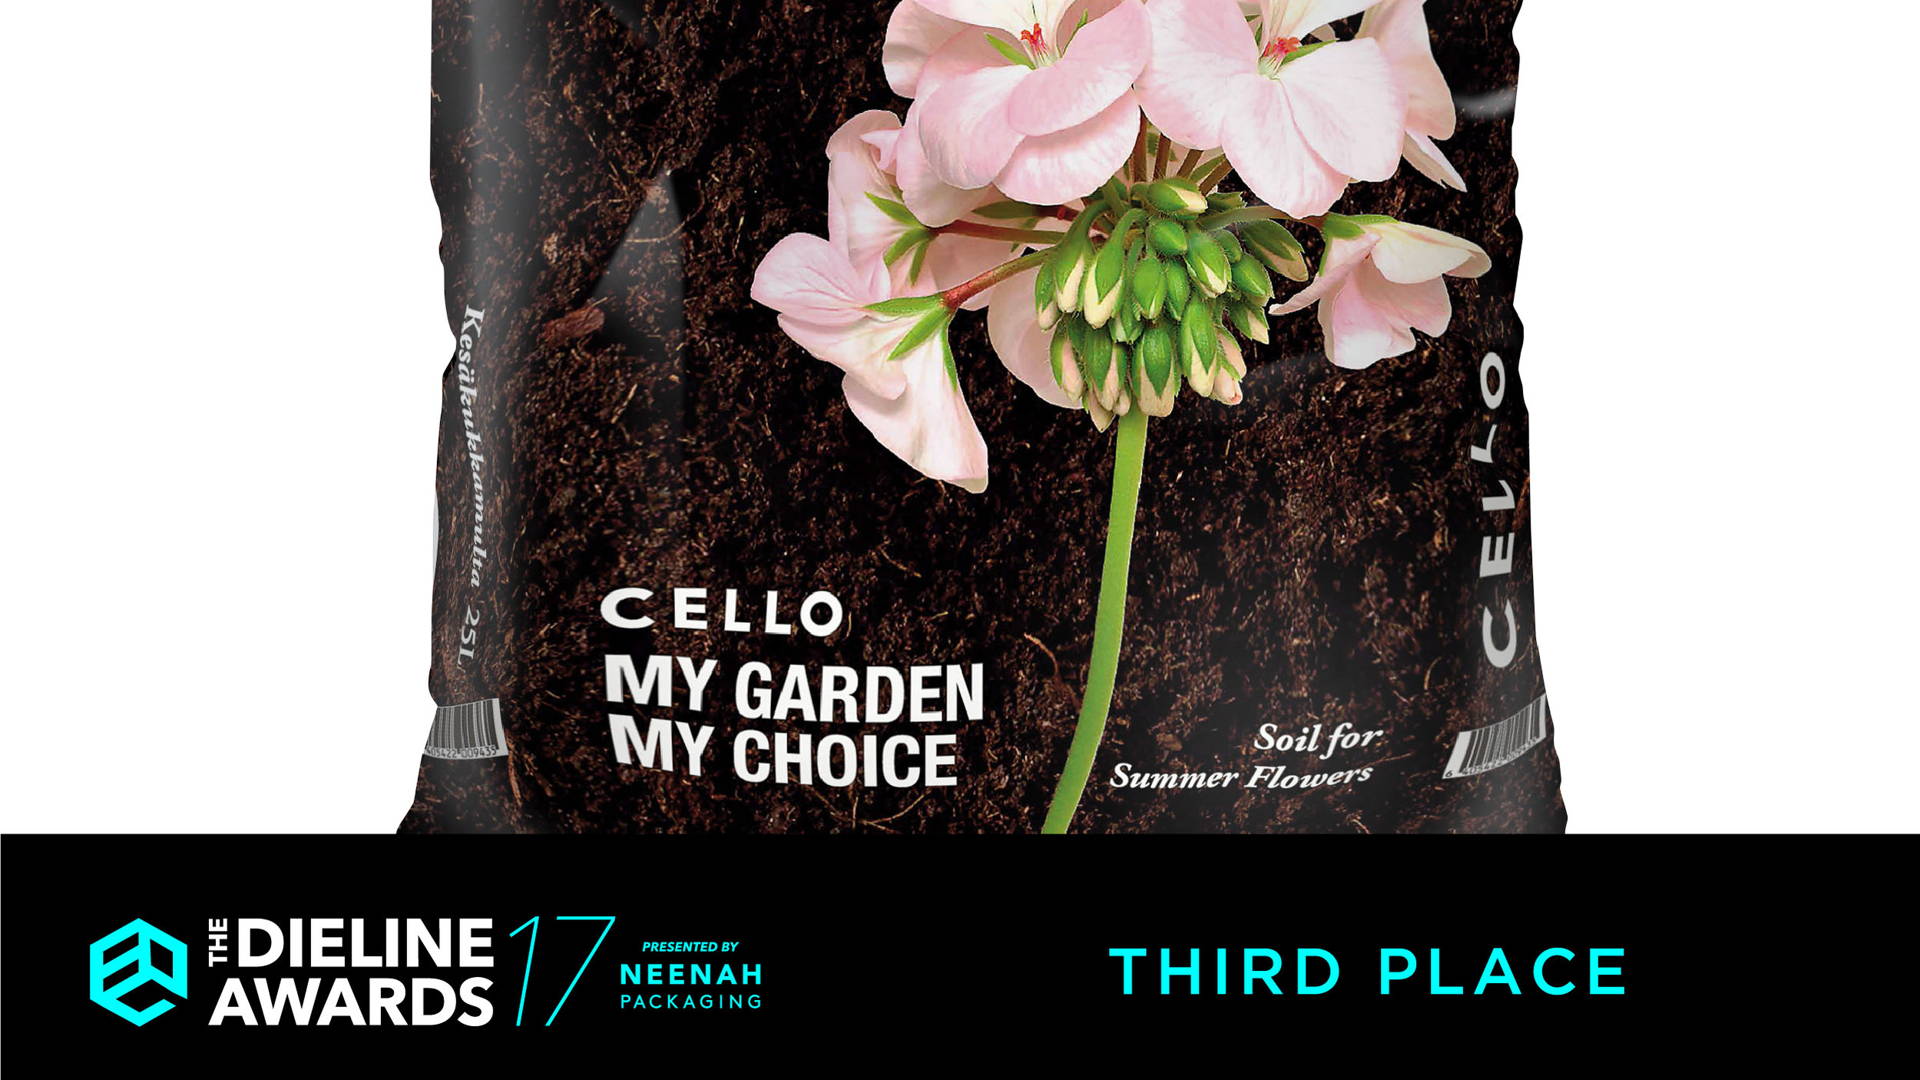 Featured image for The Dieline Awards 2017: Cello Garden Soils